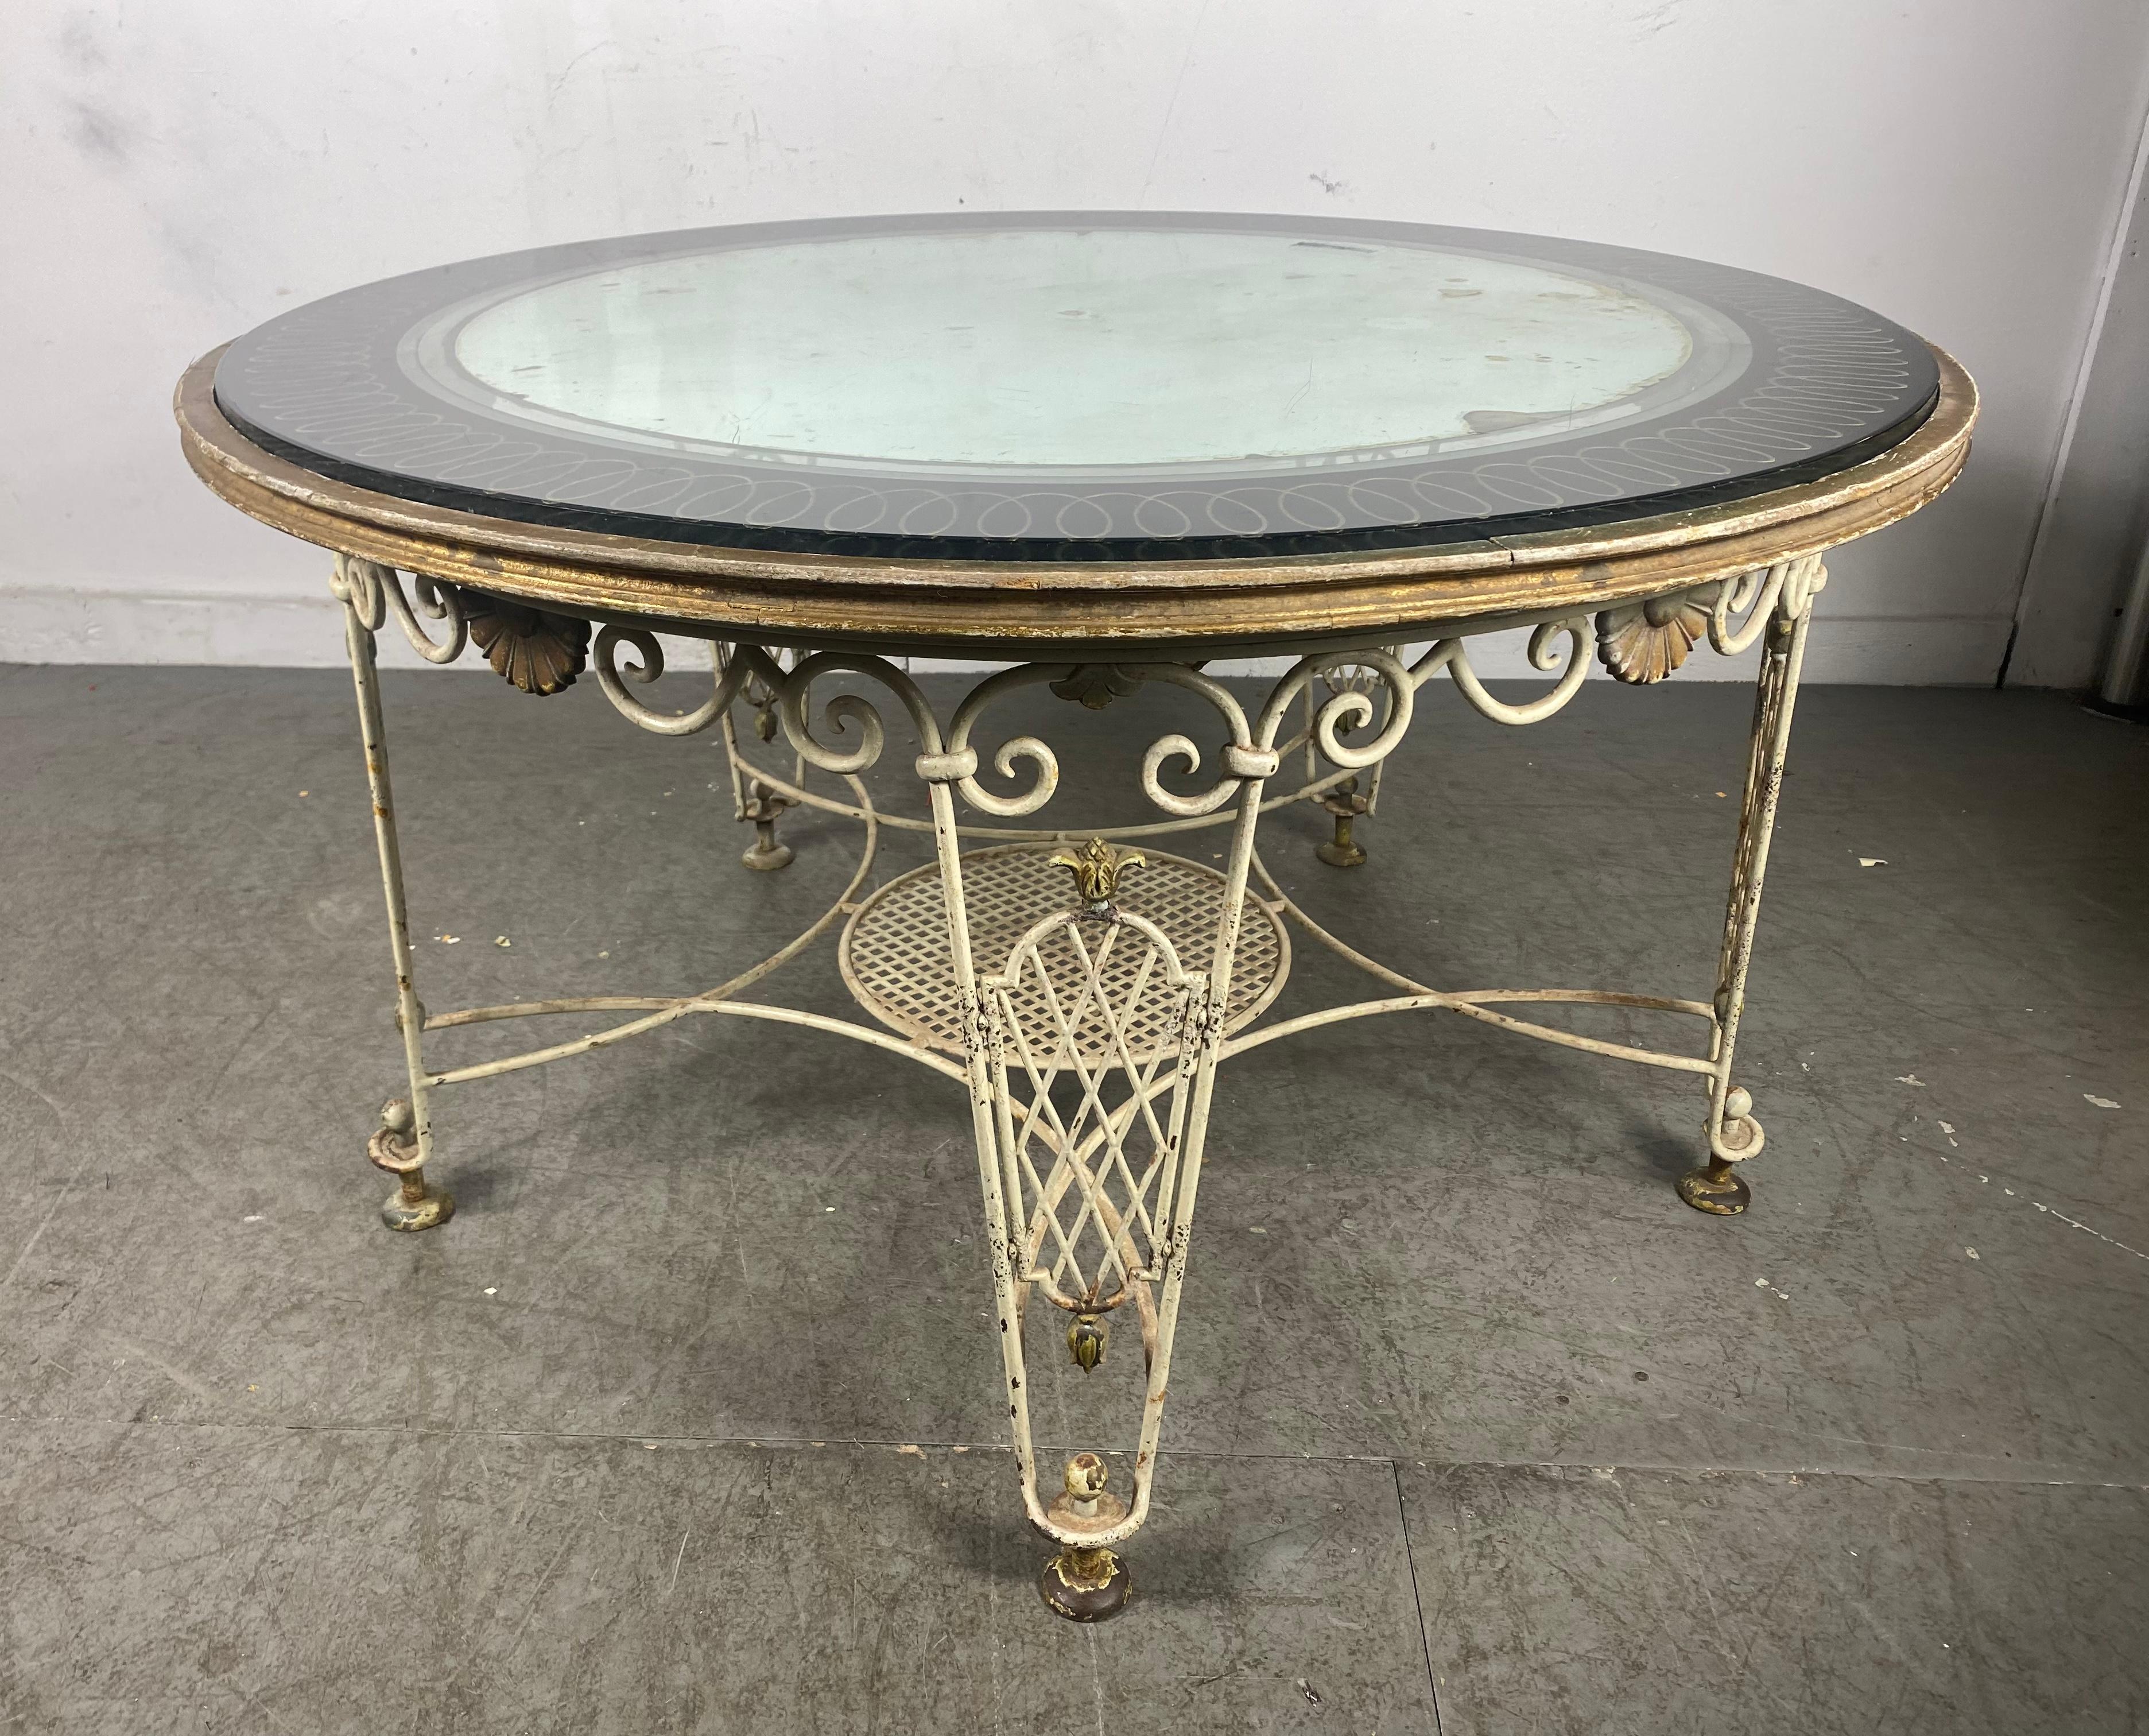 Delightful and chic round coffee table with a scrolled wrought iron base with highly decorative detail and twisted gilt iron wood top surround. Gilding to base. Verre Eglomise´ mirrored table top. Blemishes and fogging to mirror top.